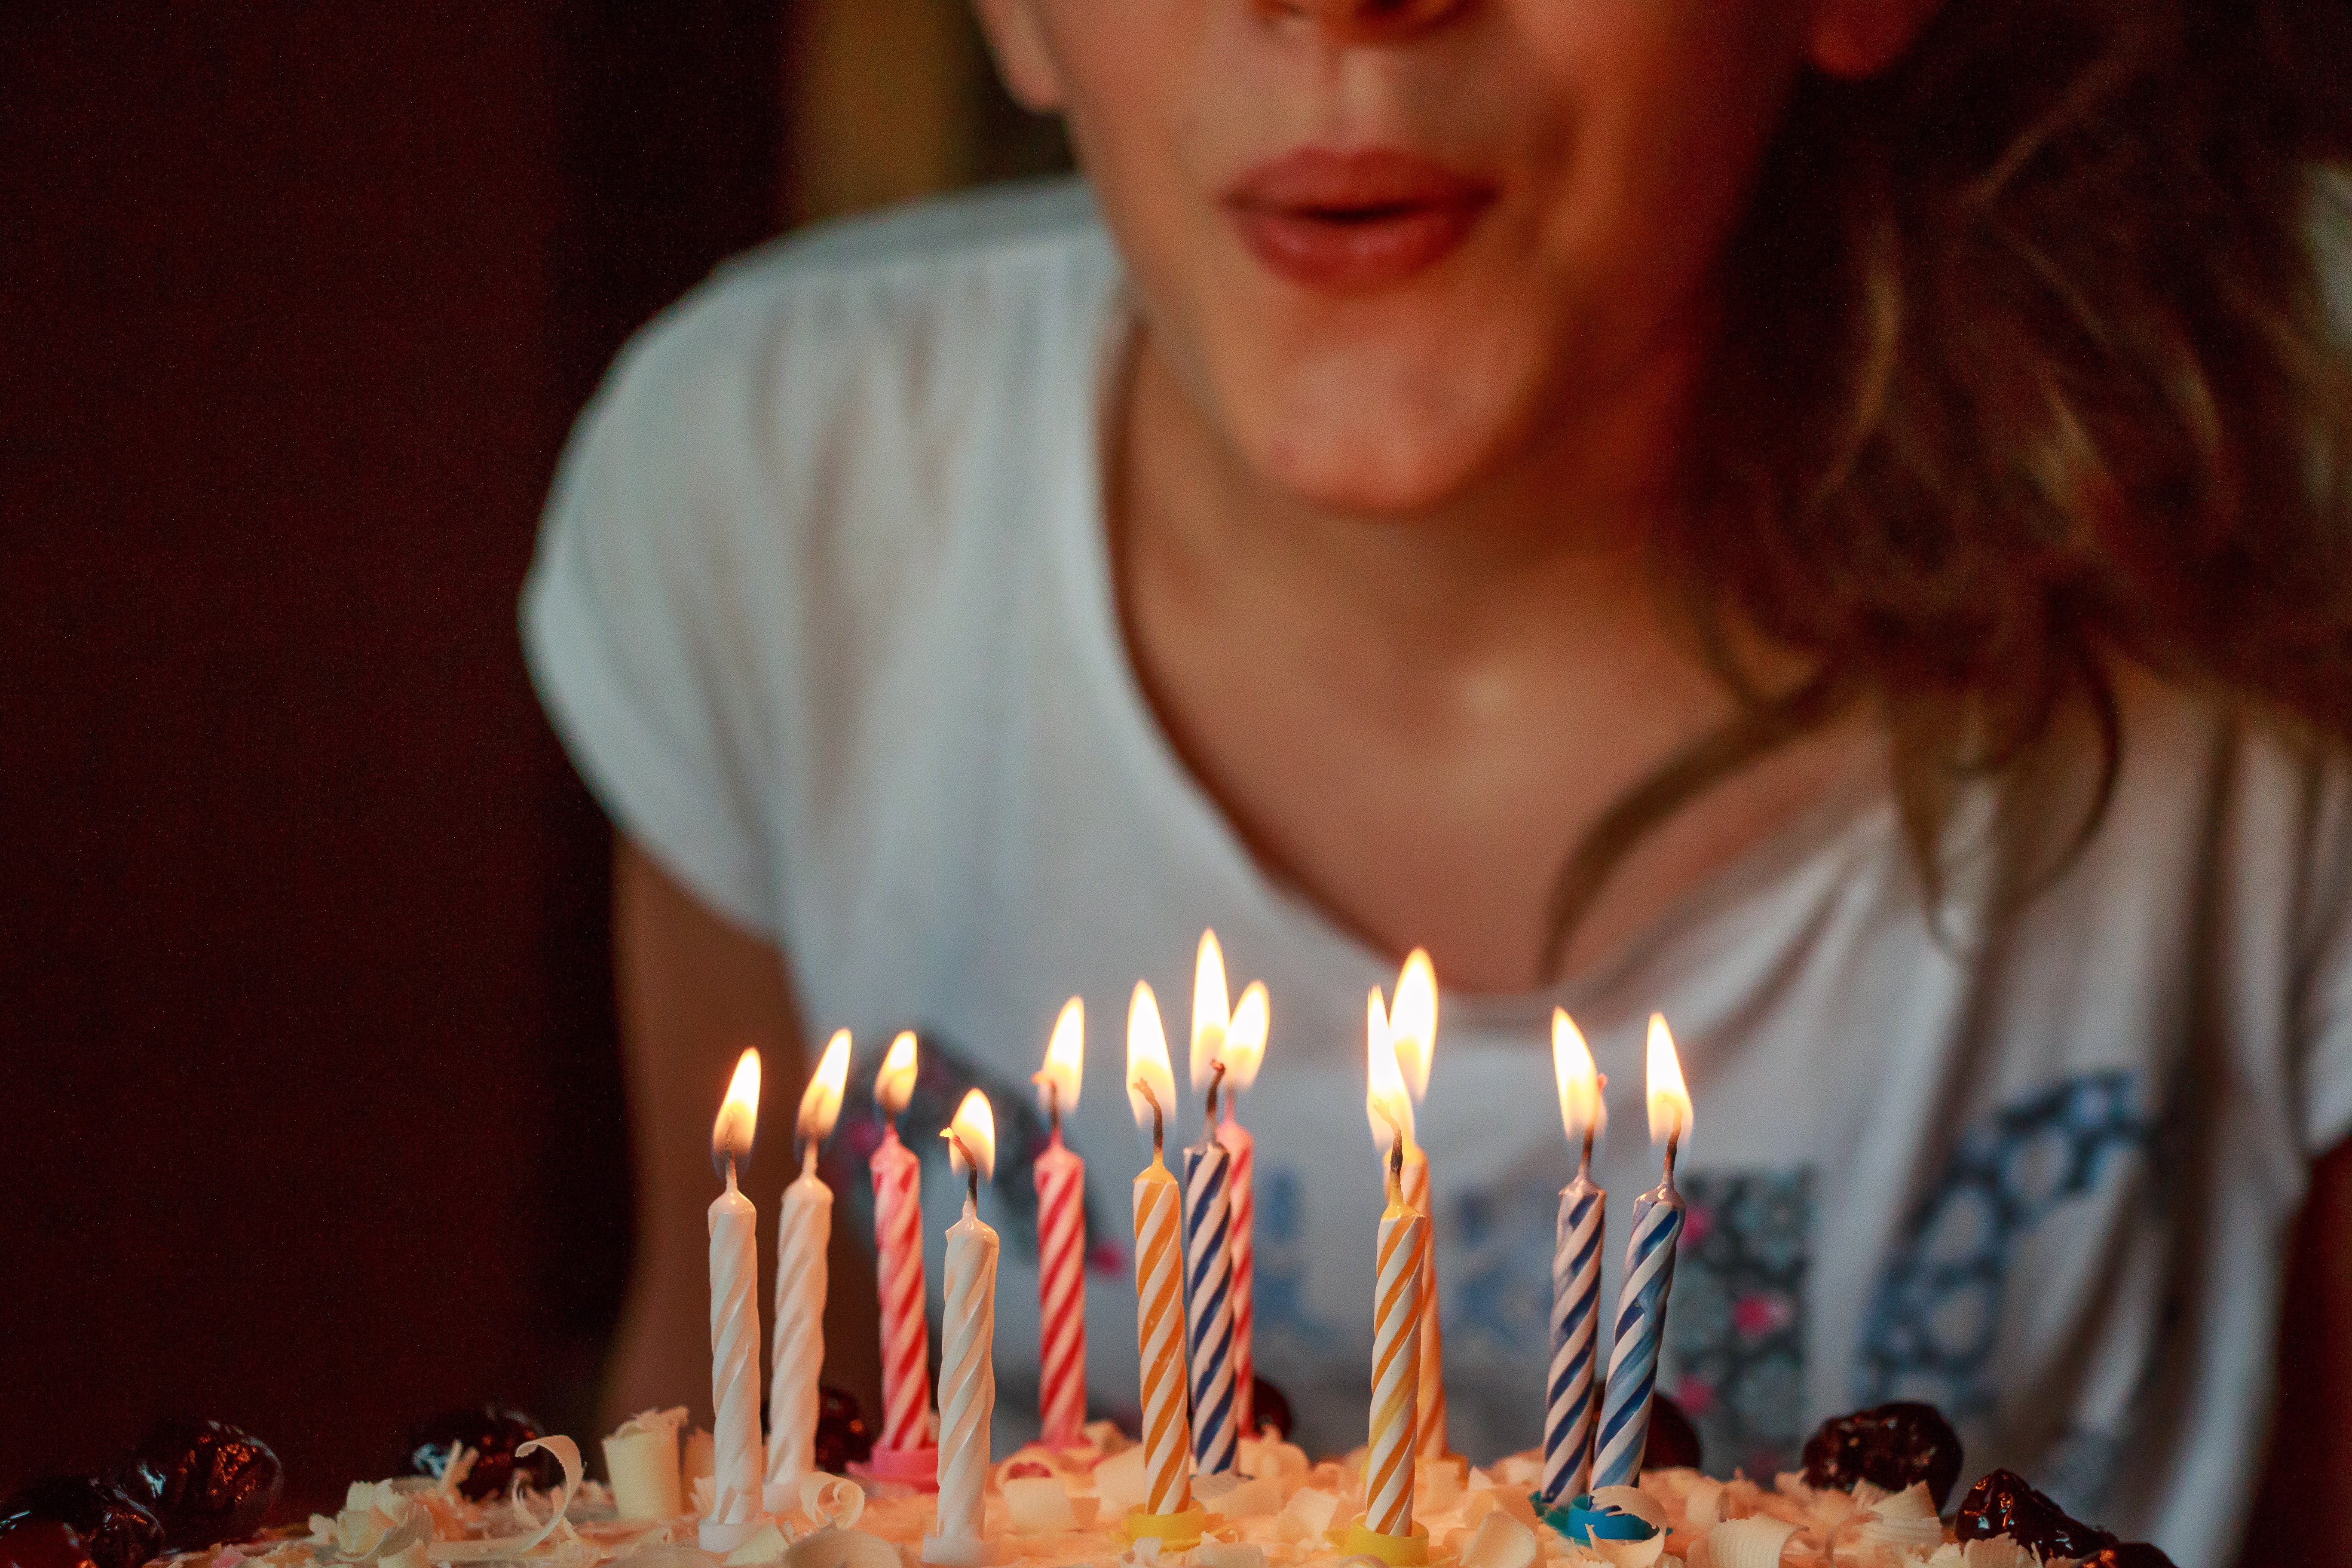 Girl blowing out candles on a cake. 